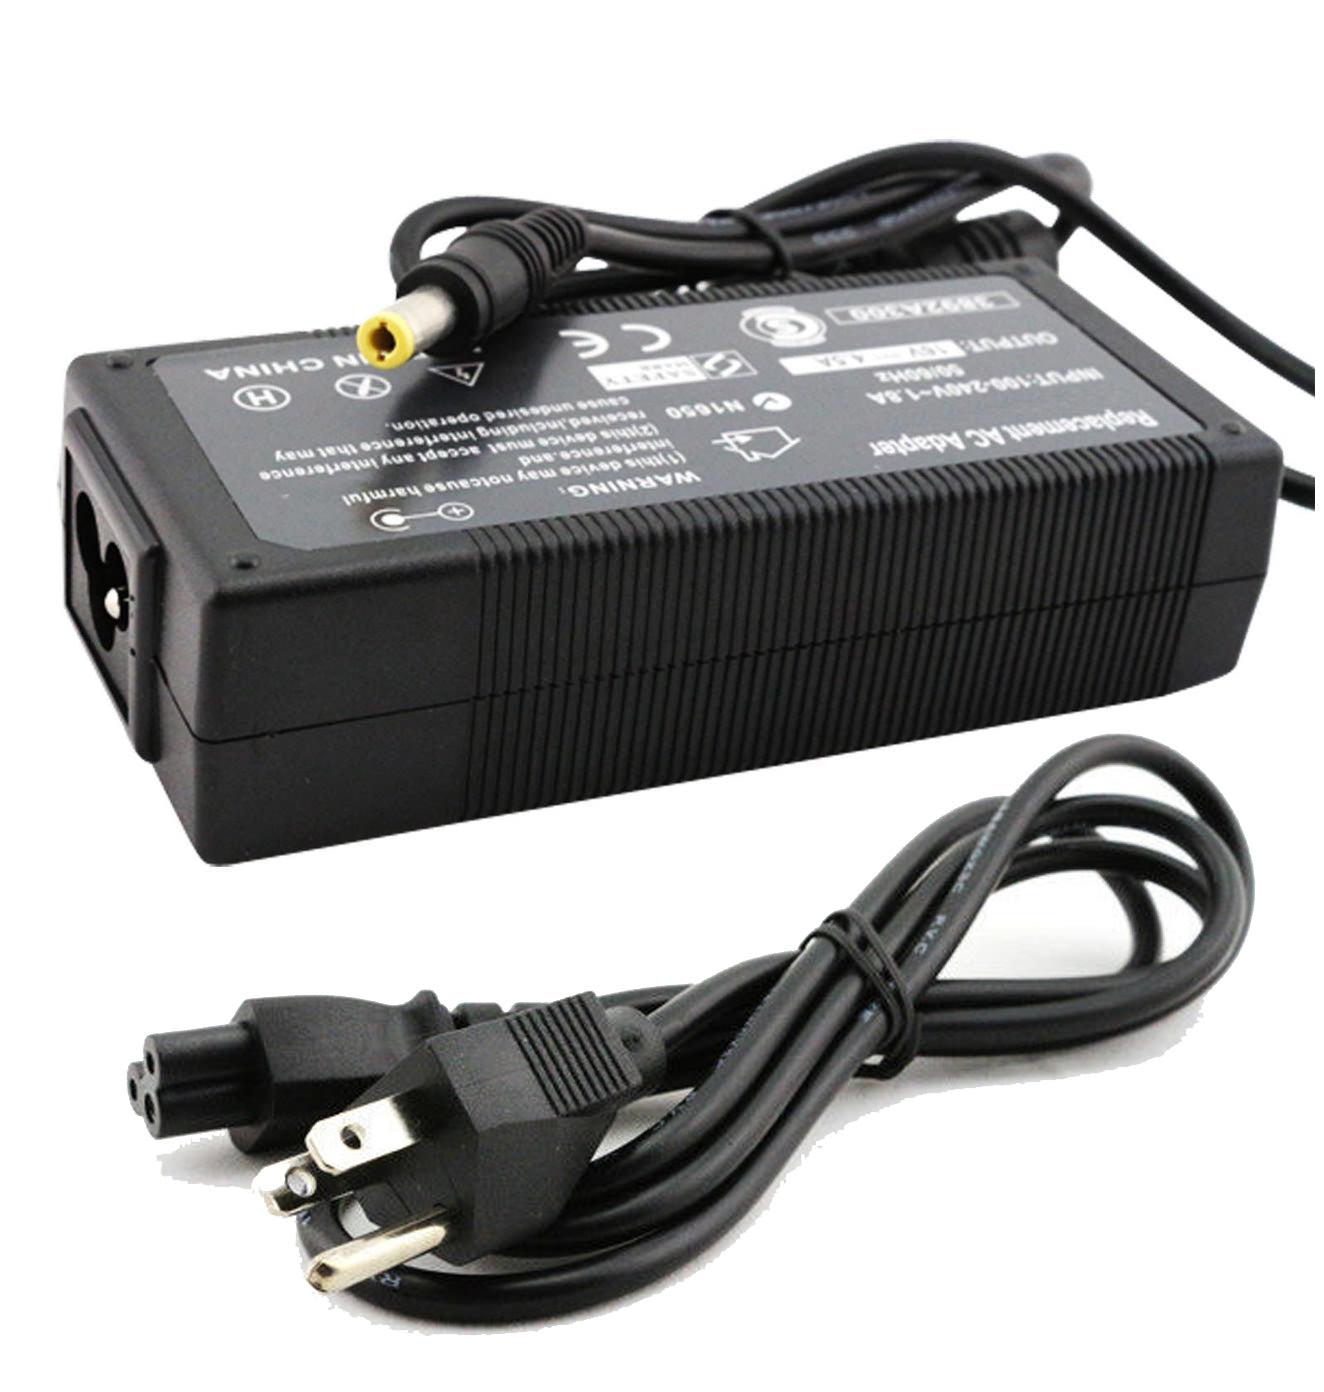 AC Adapter Charger for Panasonic Toughbook CF-T7 Notebook.